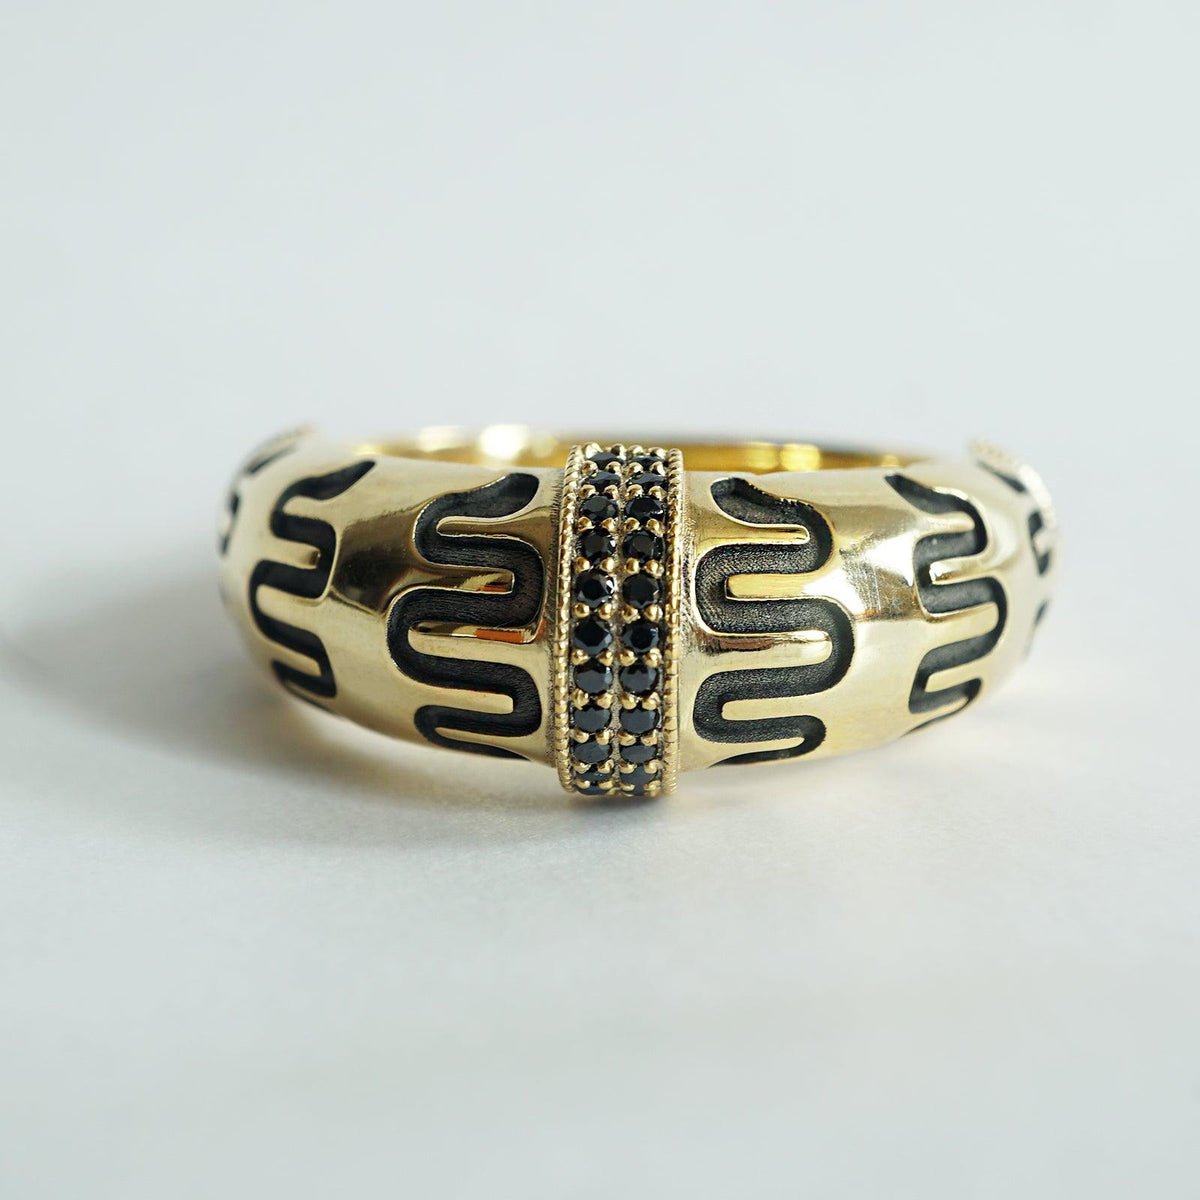 Maze Black Diamond Ring in Sterling Silver and 14K Gold, 9mm